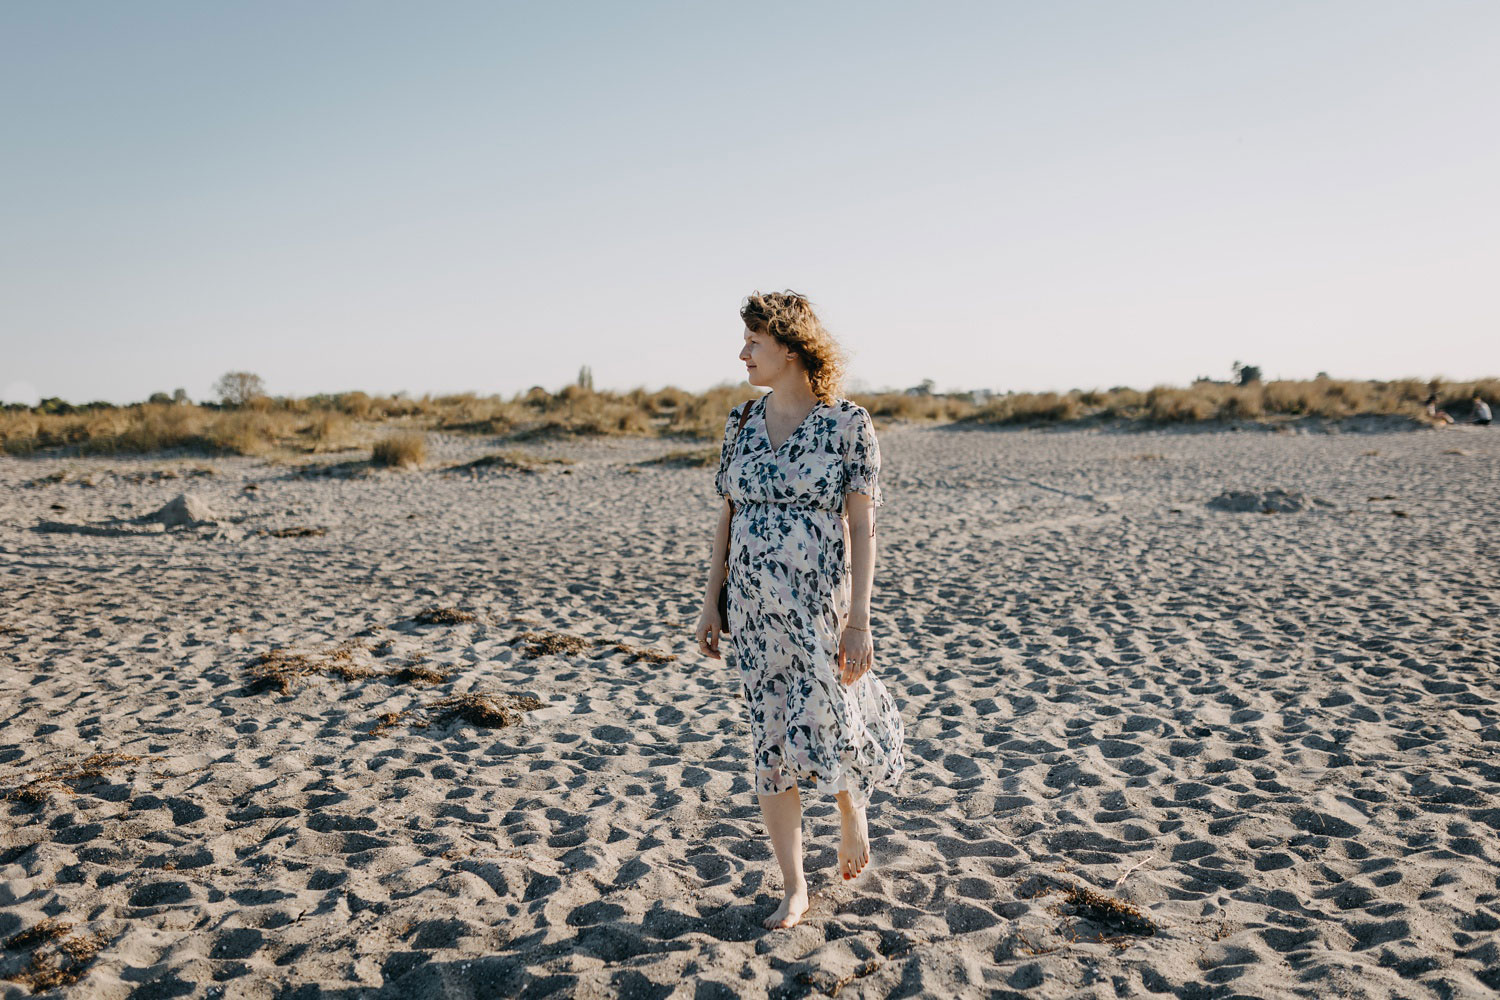 Candid moments of an expectant mother cherishing her pregnancy at a Copenhagen beach